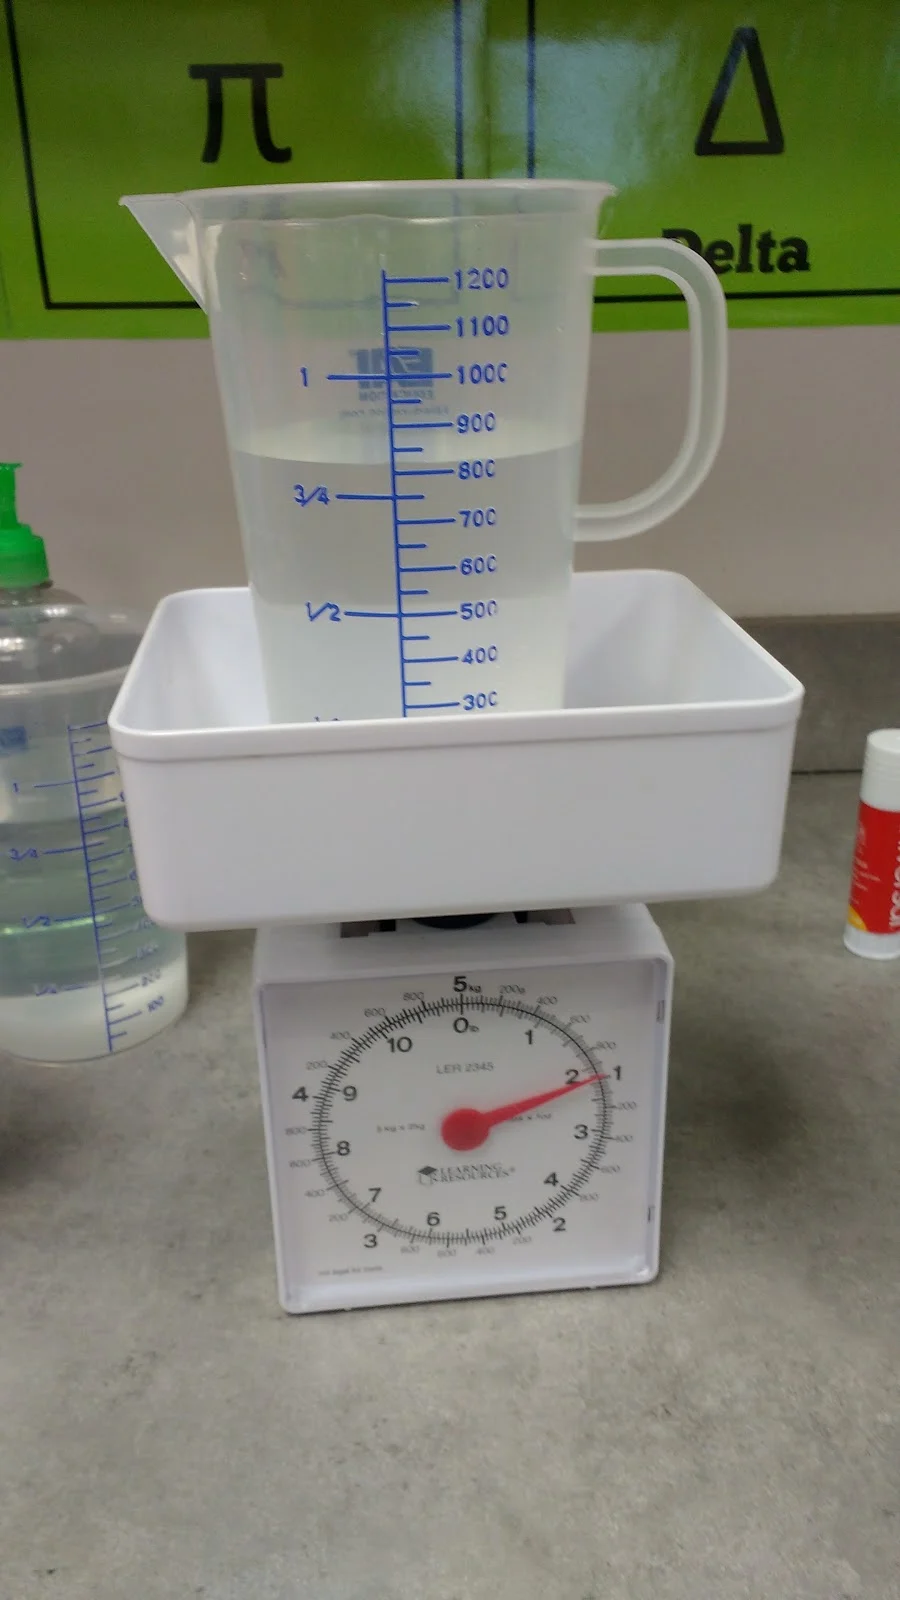 Water pitcher on scale